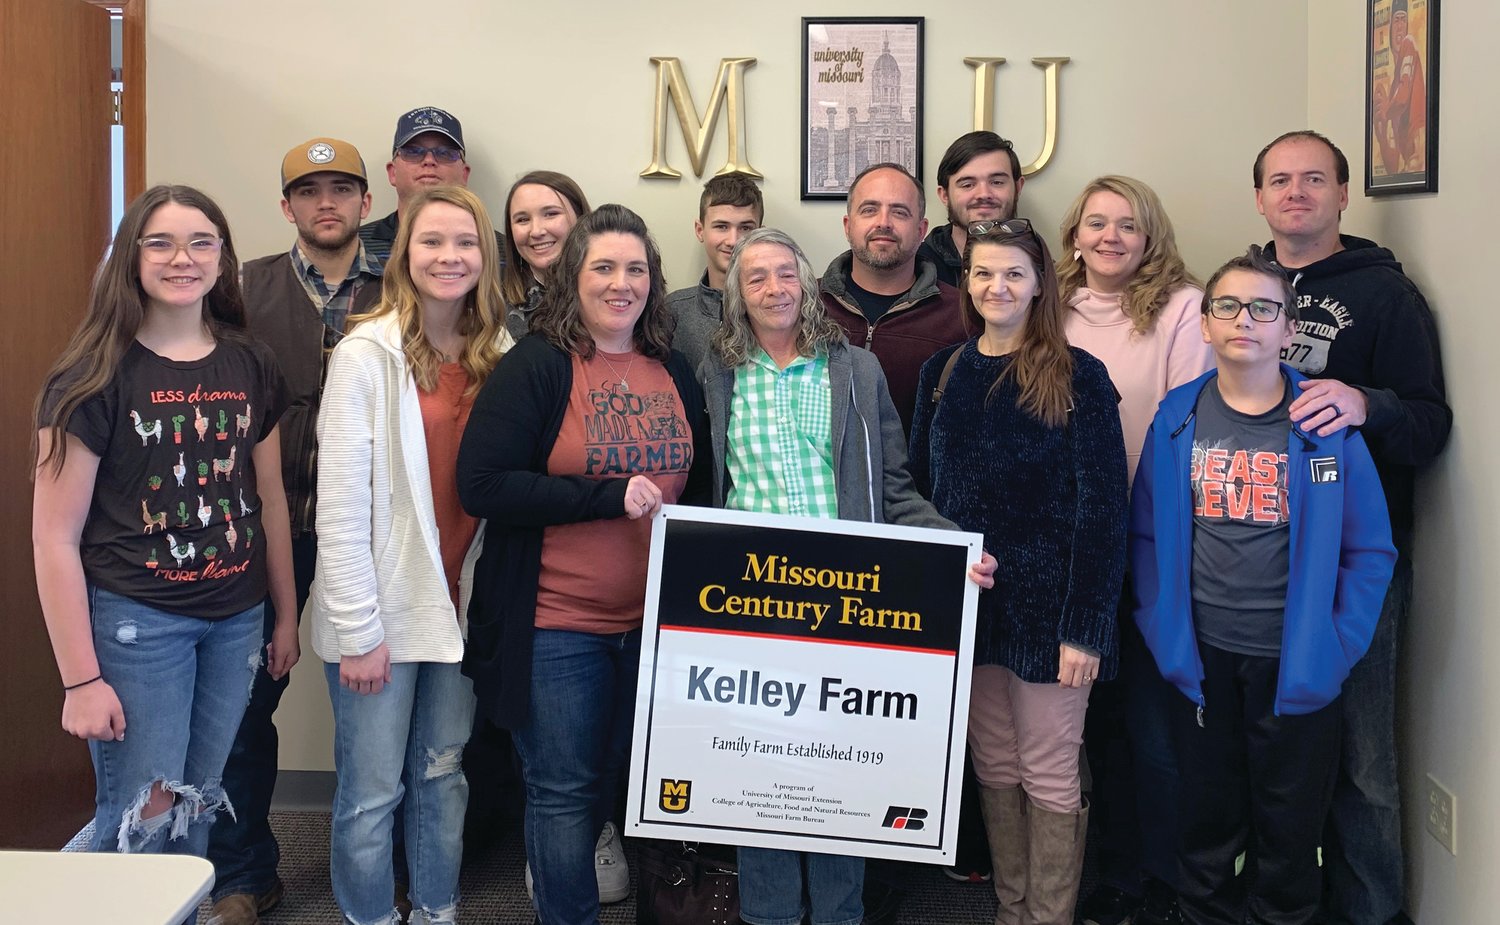 The family of Glinda Kelley celebrates their Century Farm designation. The year of the Century Farm acquisition was 1919, with 117 acres in Norwood. Great-grandfather, J.E. Kelley, was the original owner.